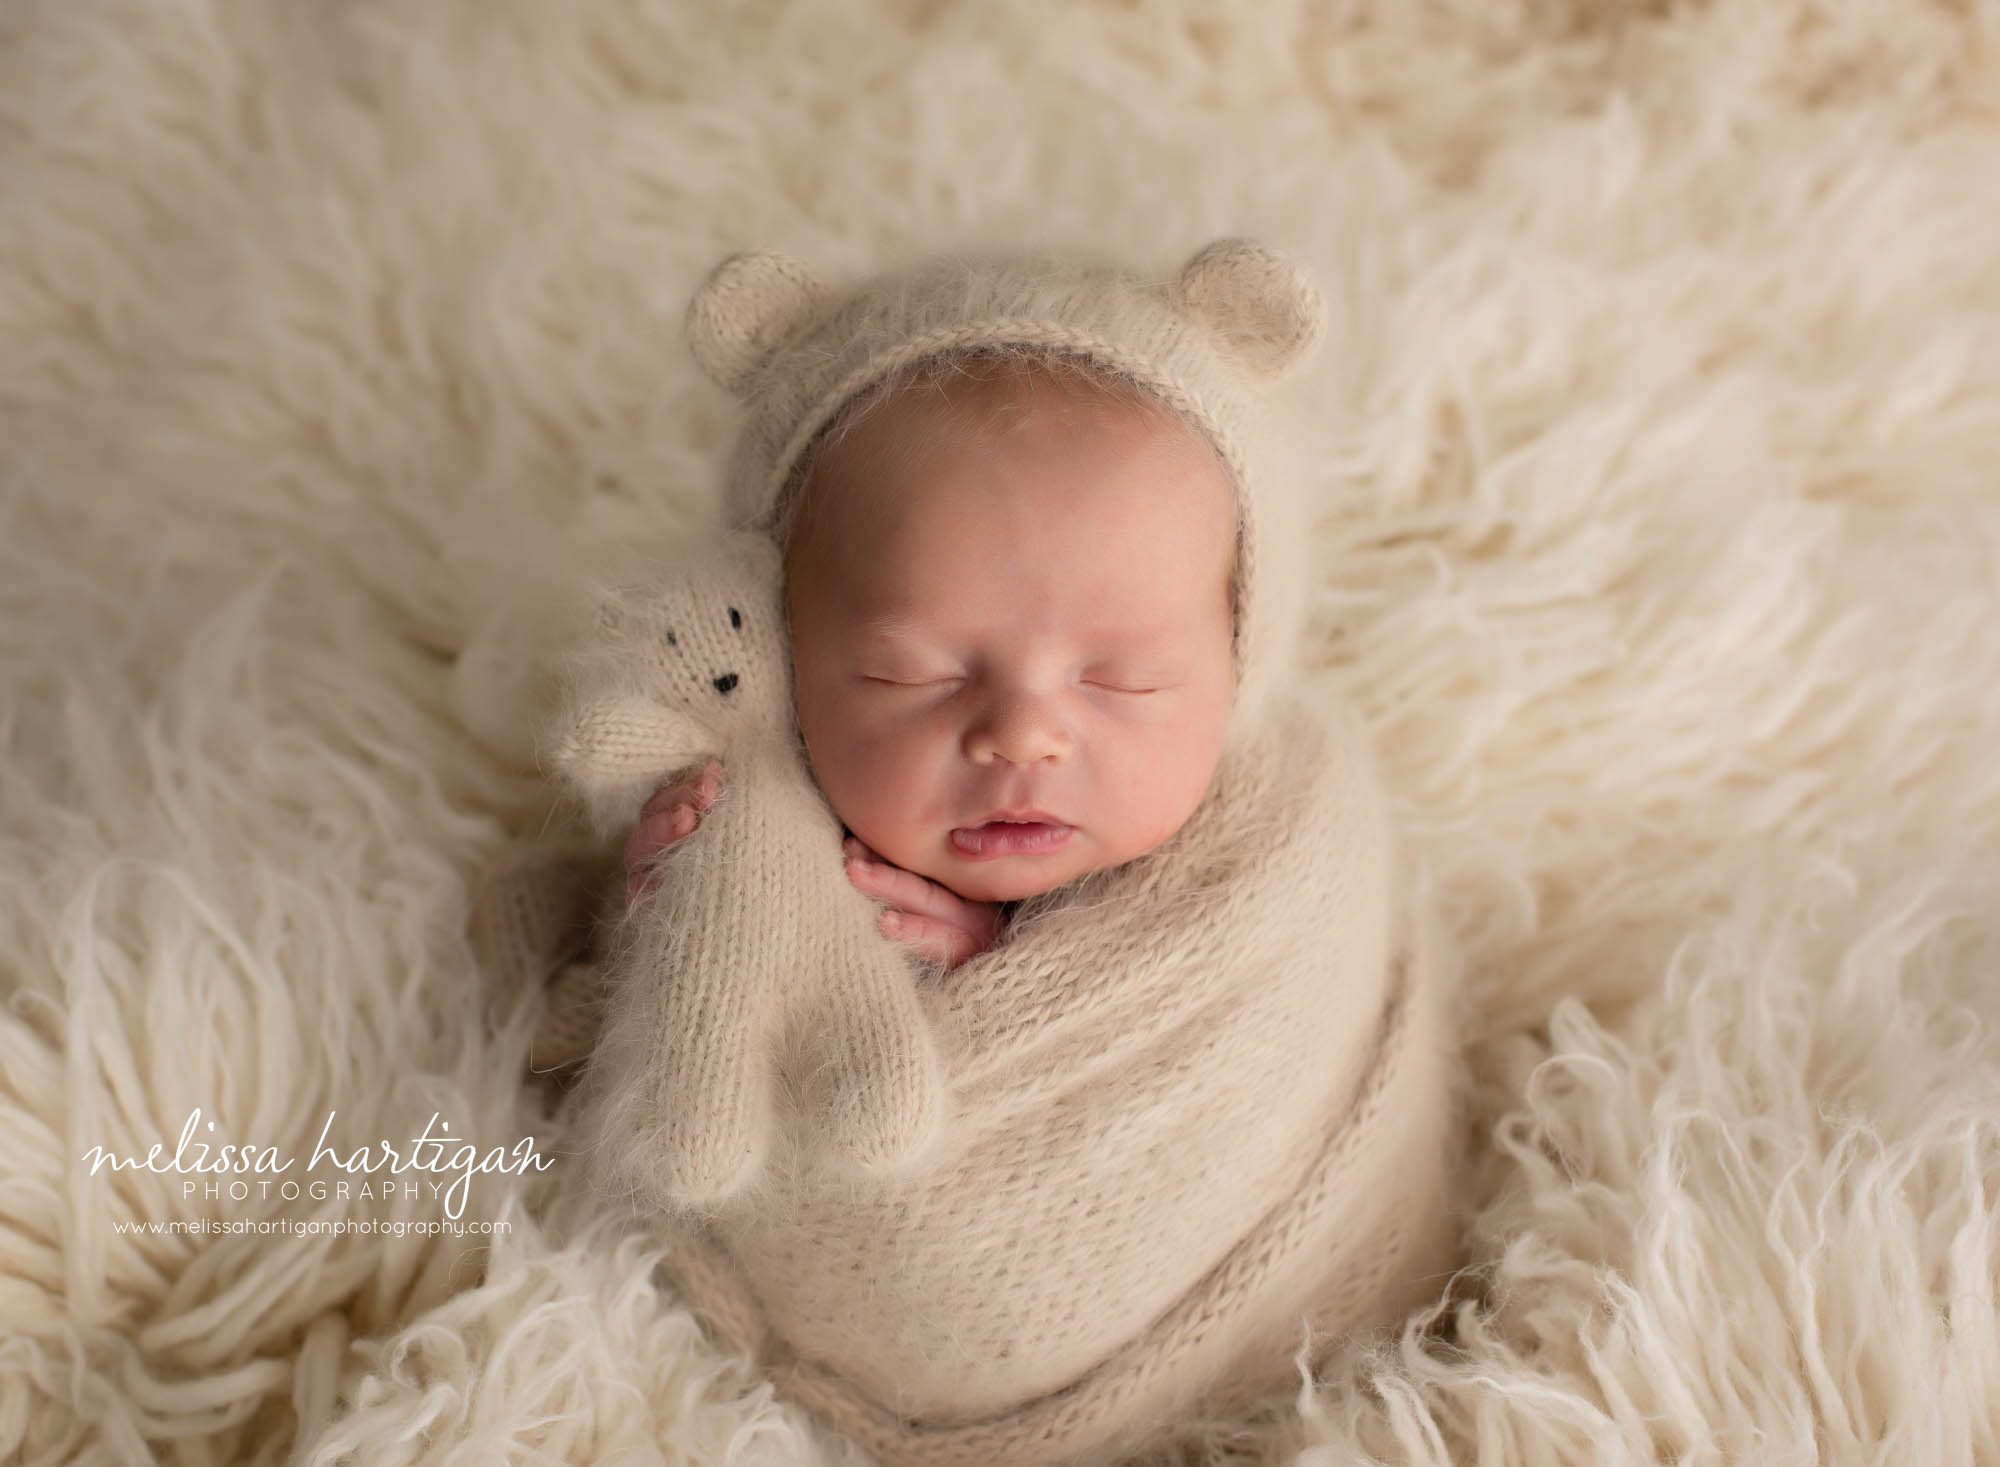 Baby boy wrapped in knitted wrap with matching bear bonnet and teddy bear newborn photography CT